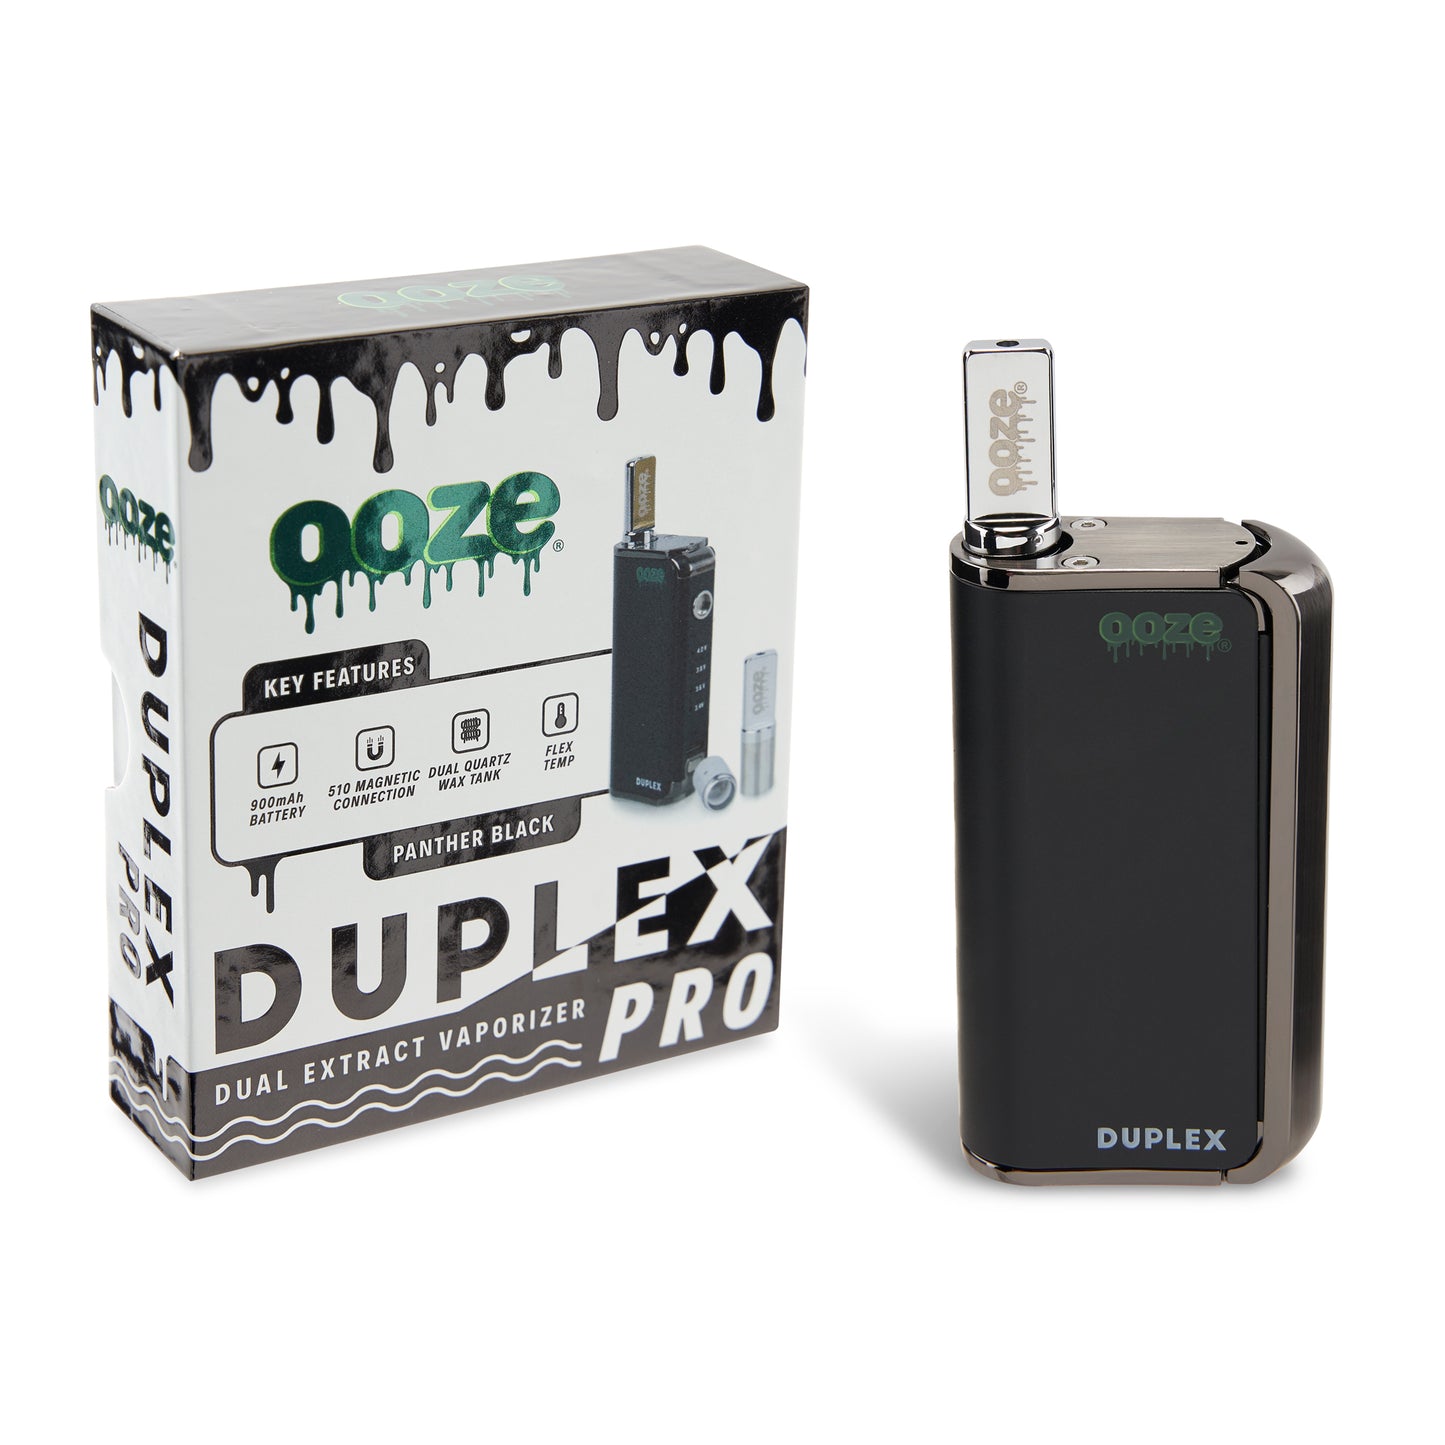 The Panther Black Ooze Duplex Pro Vaporizer is shown next to its packaging with the wax atomizer inserted.